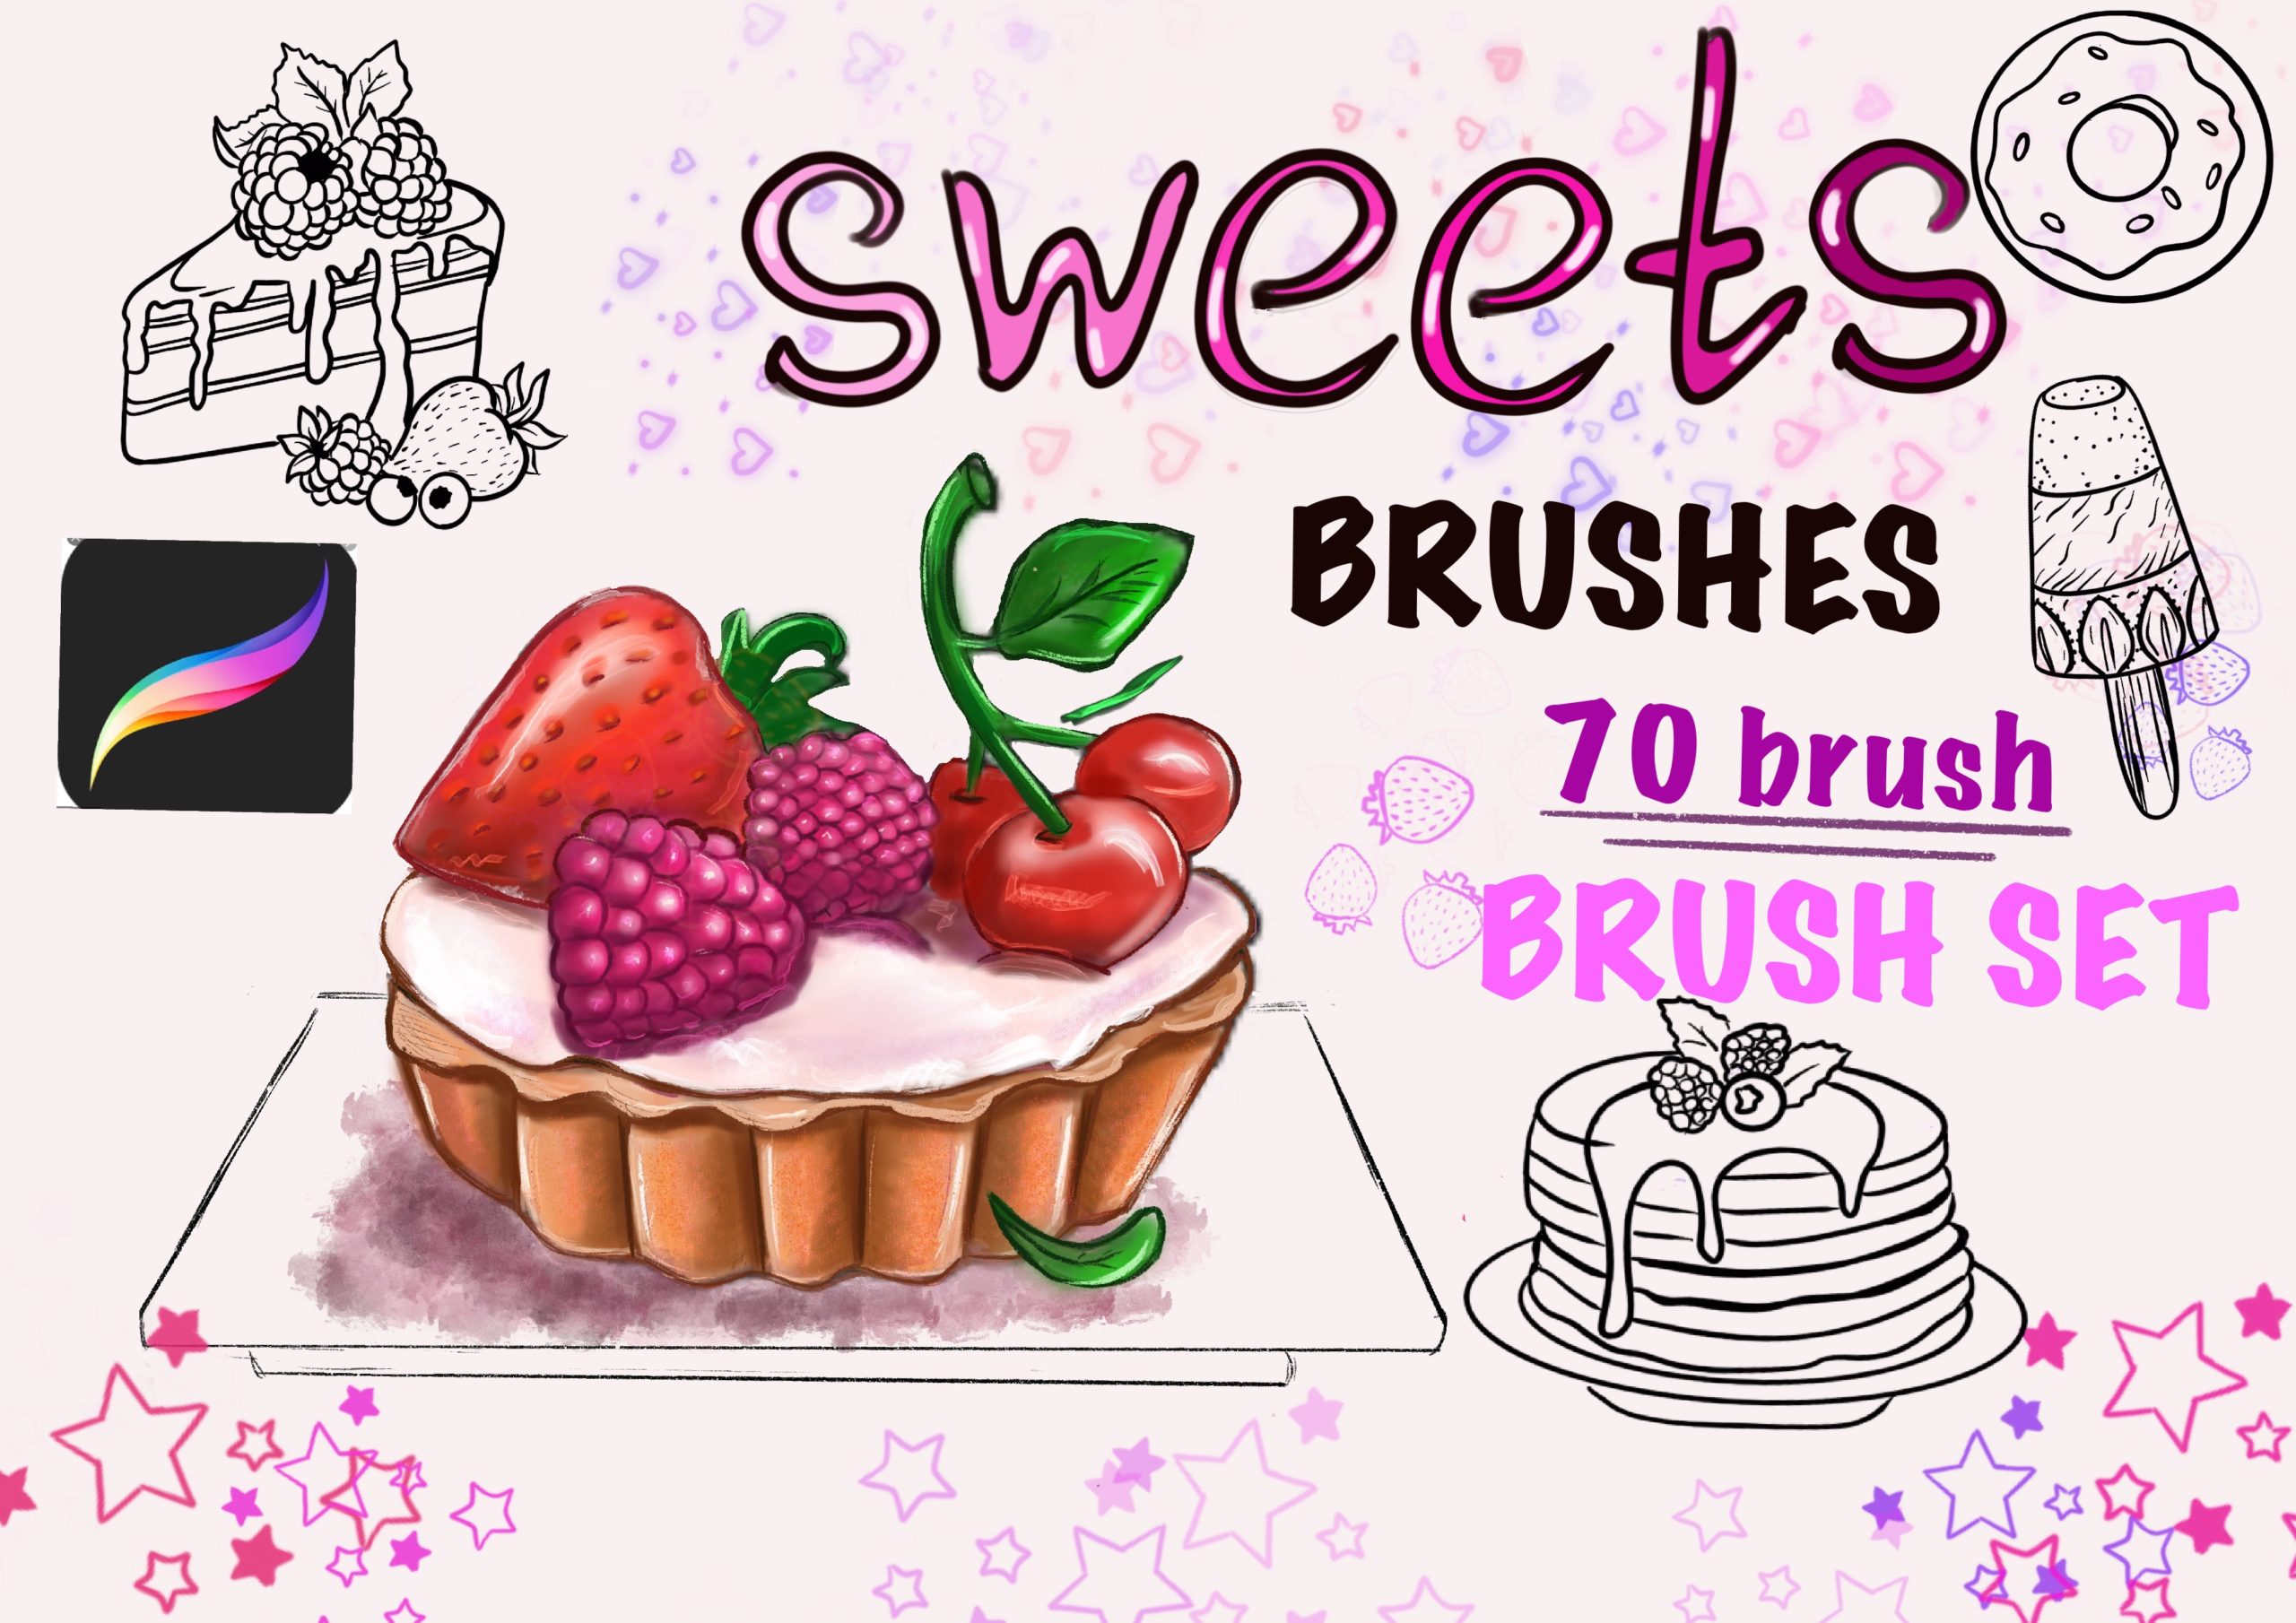 Sweets Brushes